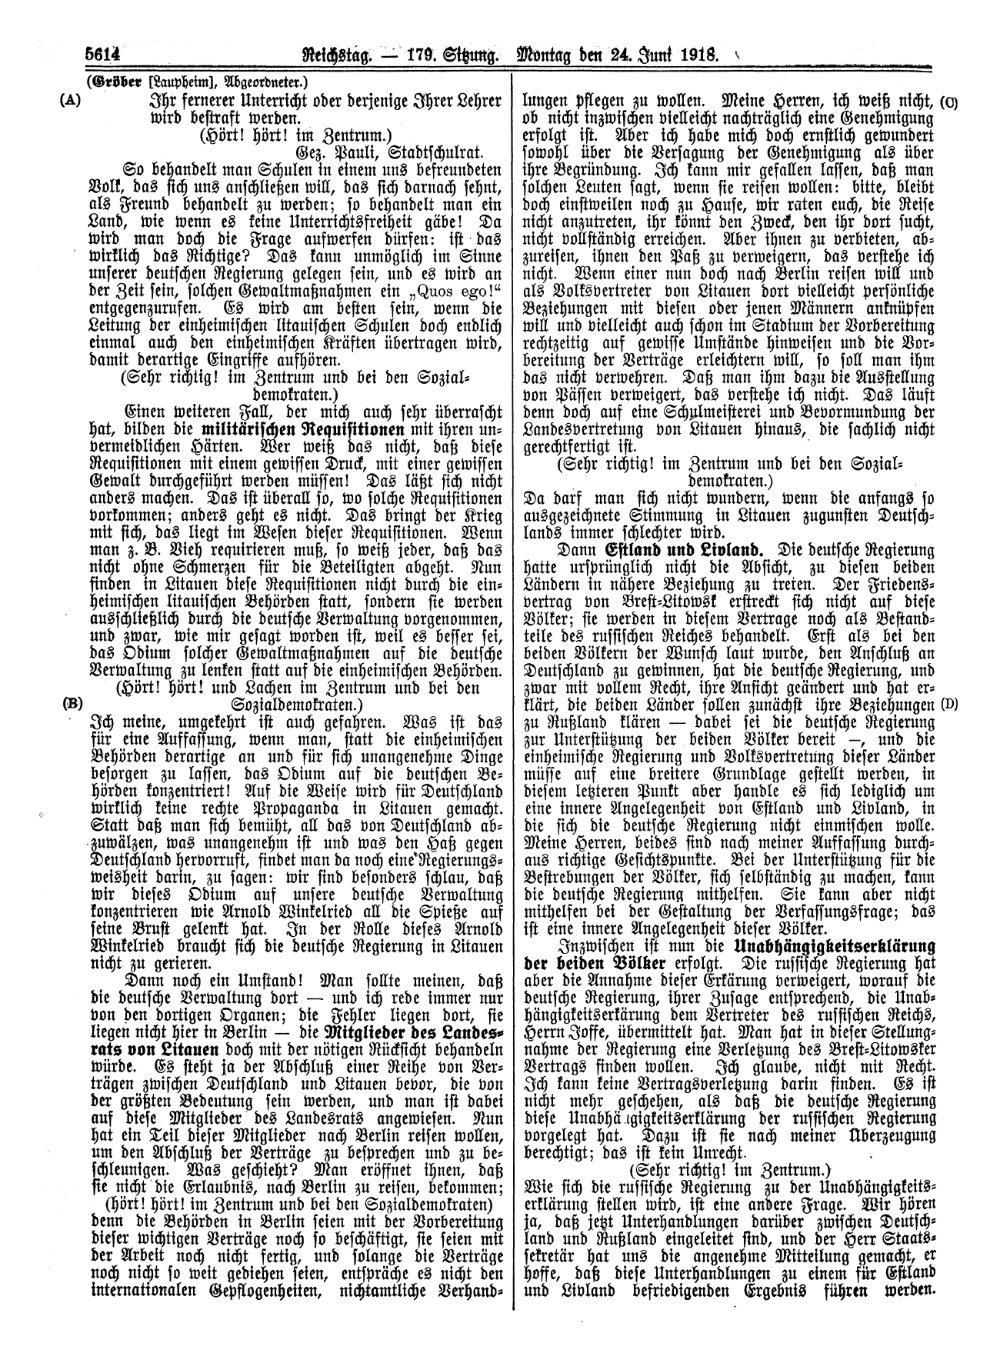 Scan of page 5614